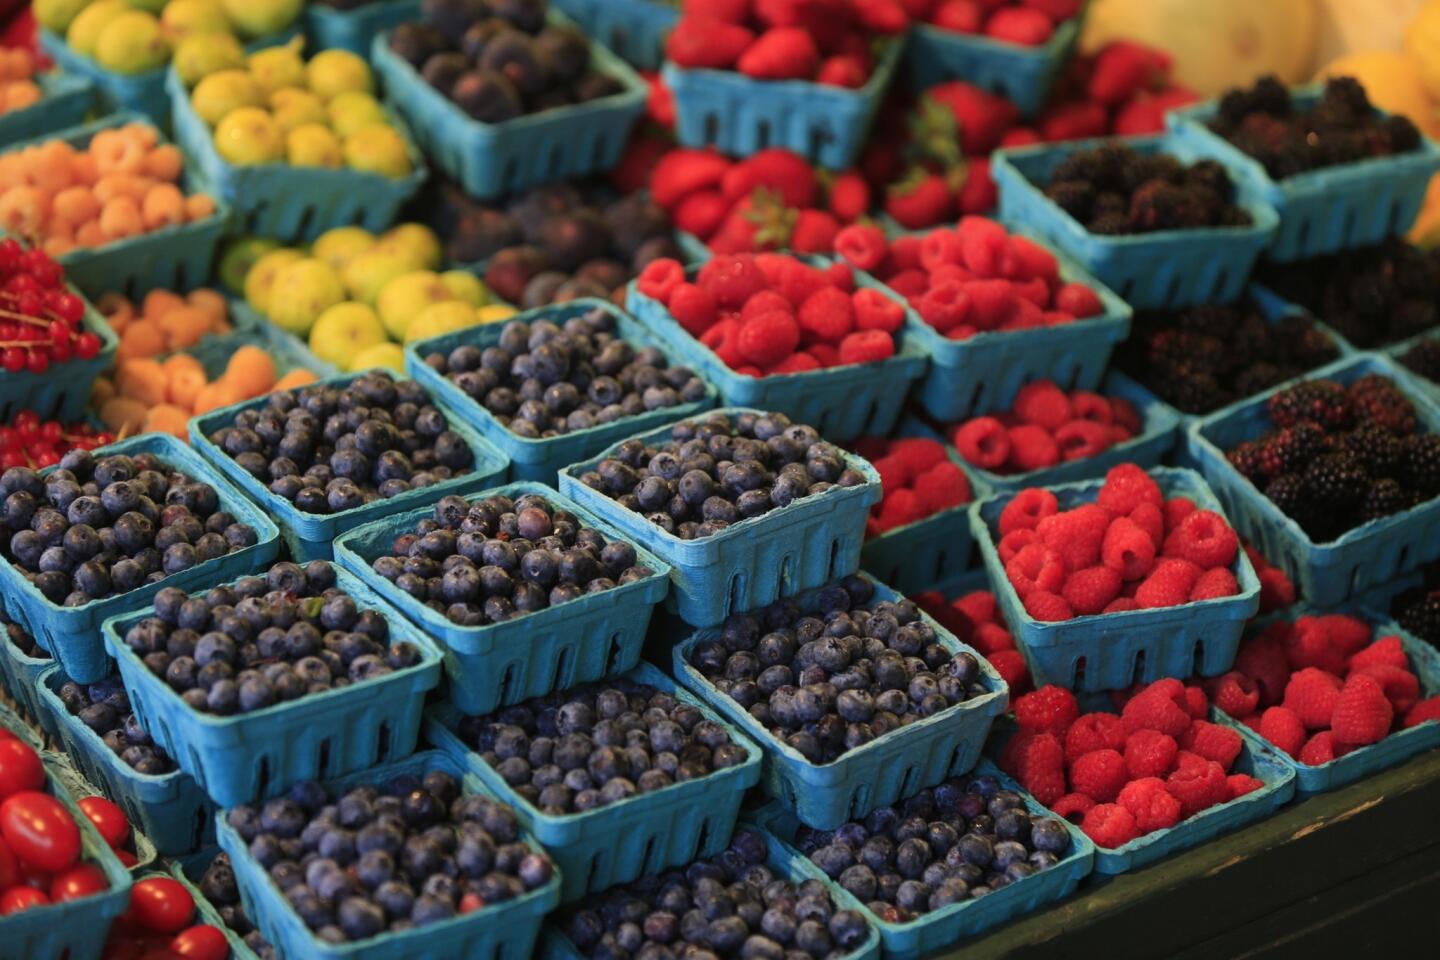 Berries and more